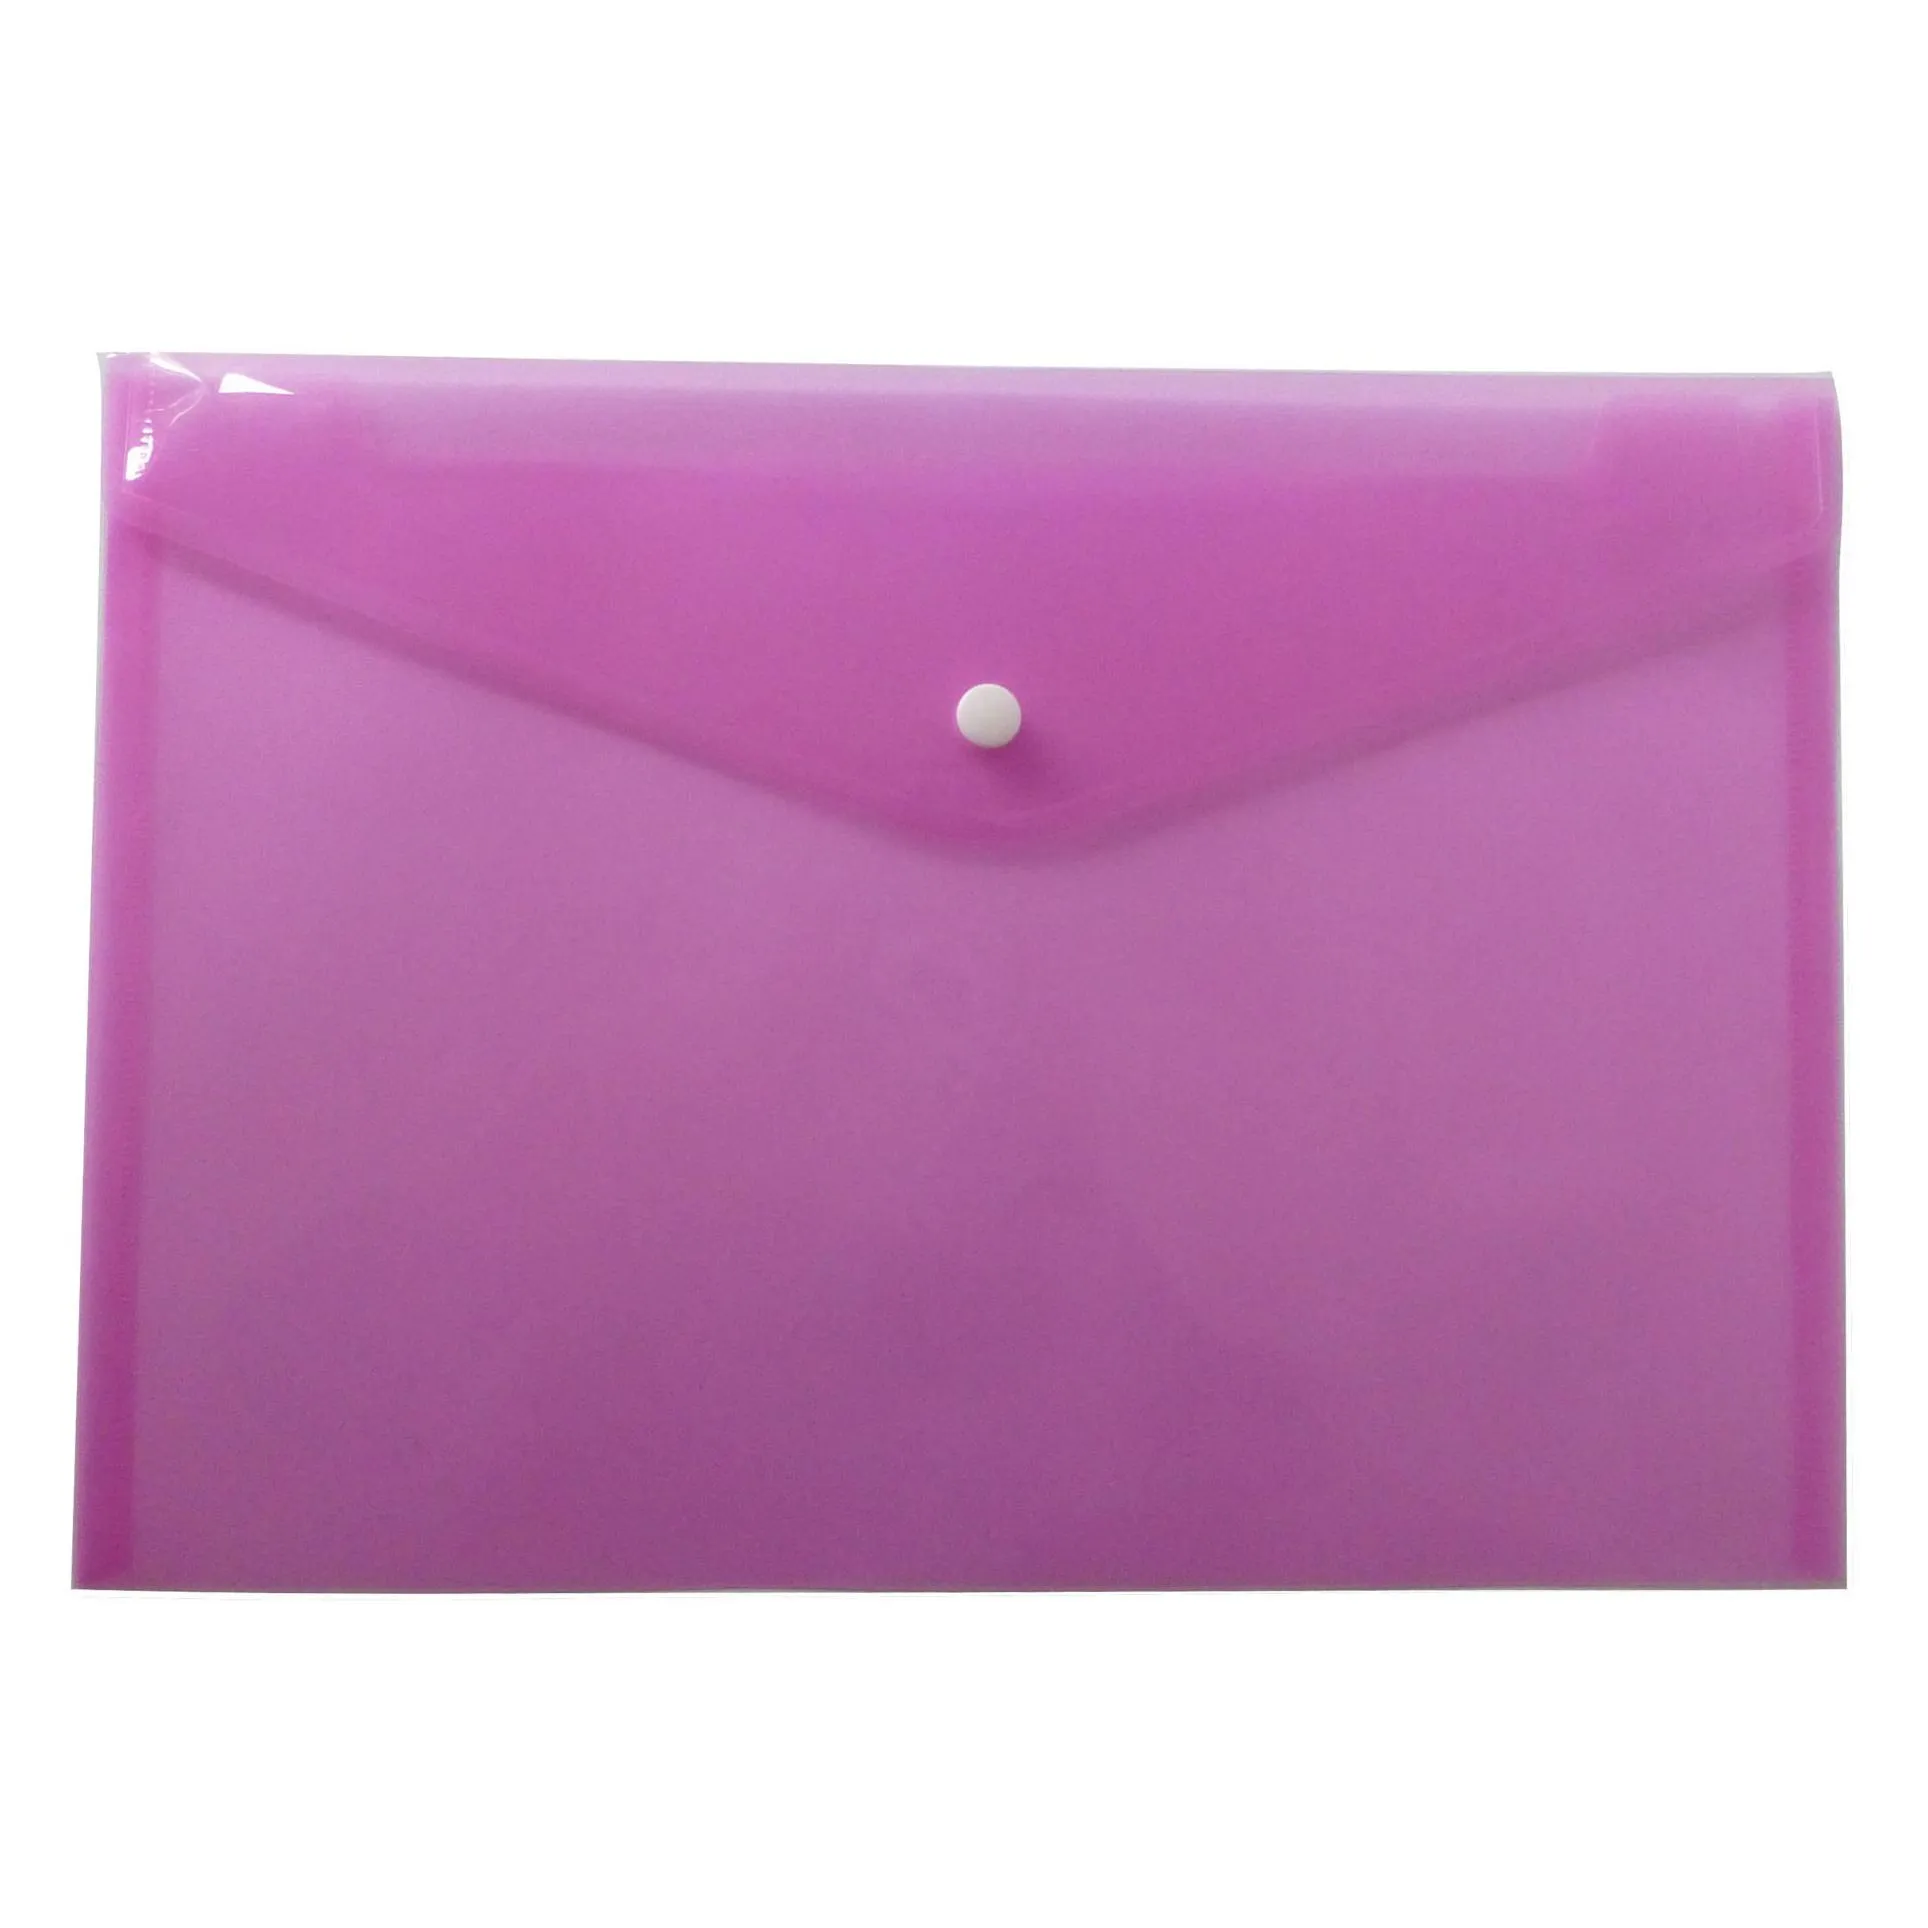 Filing Supplies Wholesale Colorf File Folder Transparent Plastic Document Bag A4 Hasp Button Classified Storage Office Stationery Orga Dhlri